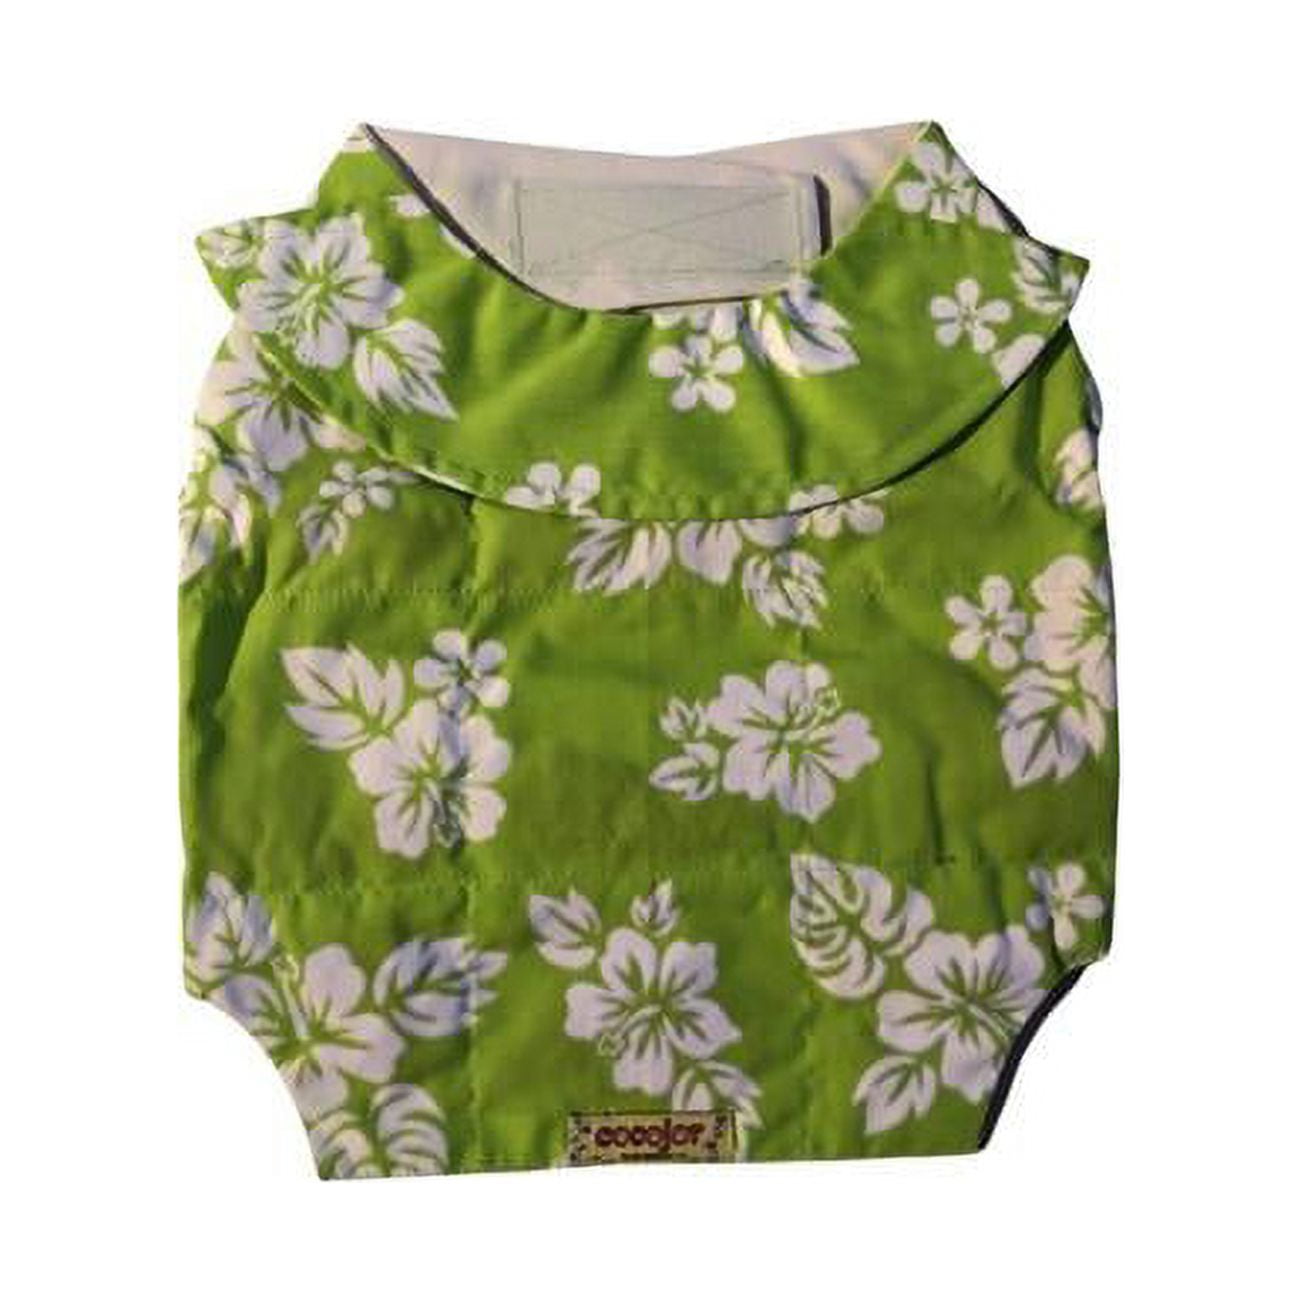 Picture of Cocojor GRN12C353 Hawaii 5-0 Cooling Vest for Dog, Green - 2XS